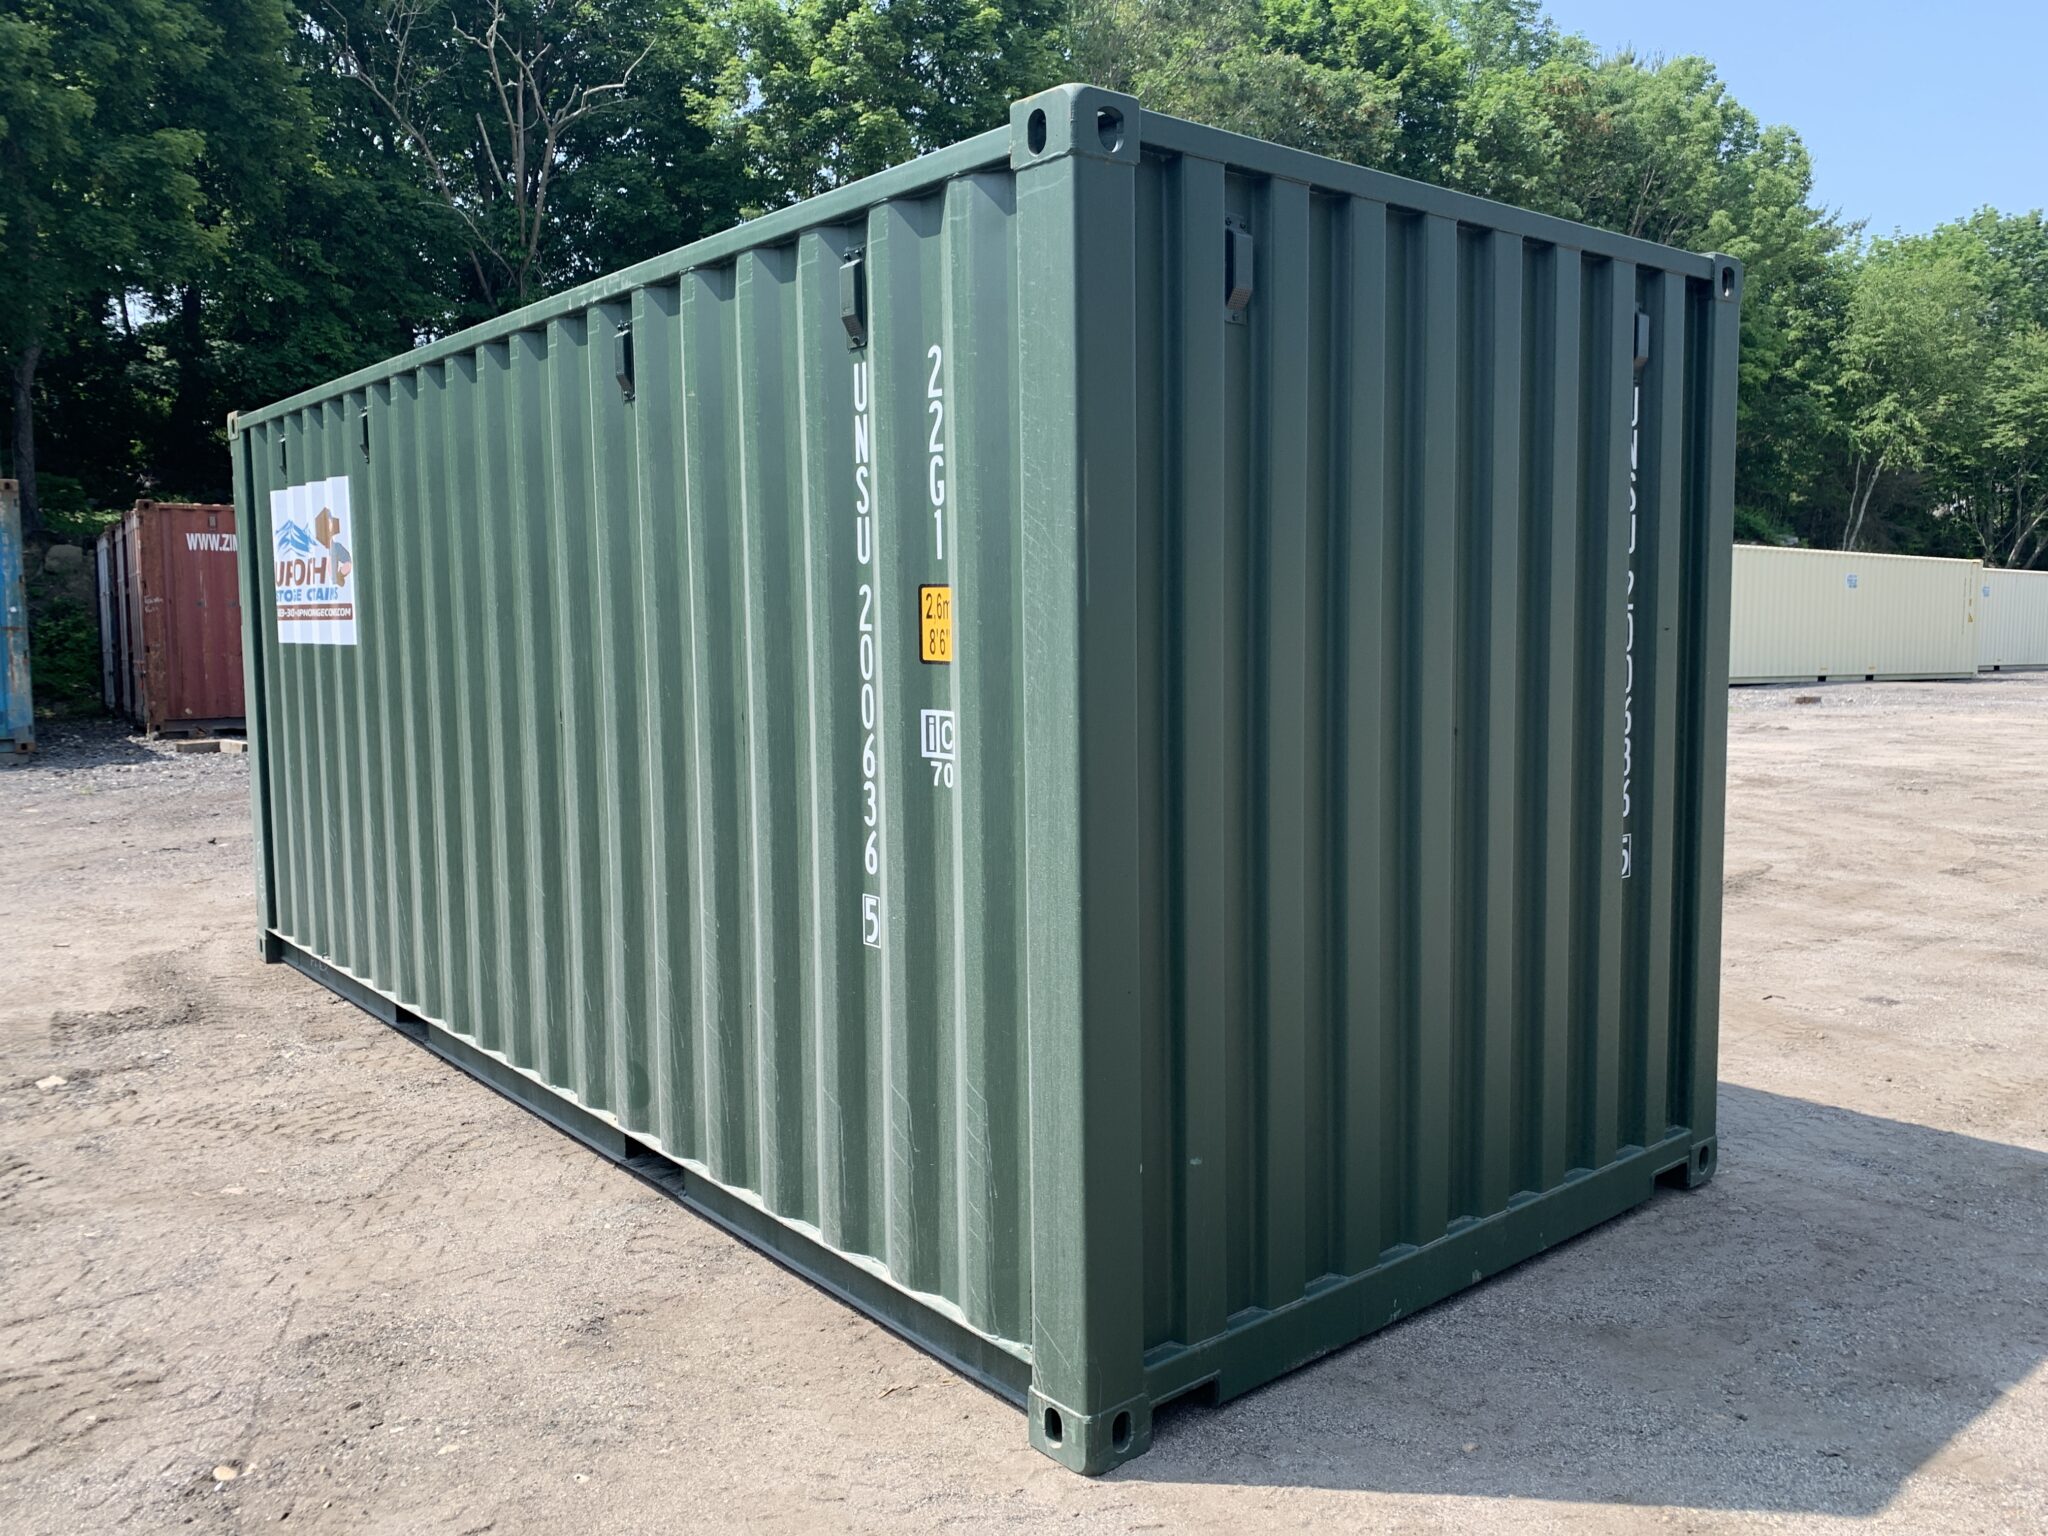 https://upnorthstoragecontainers.com/wp-content/uploads/IMG_1697-scaled.jpeg